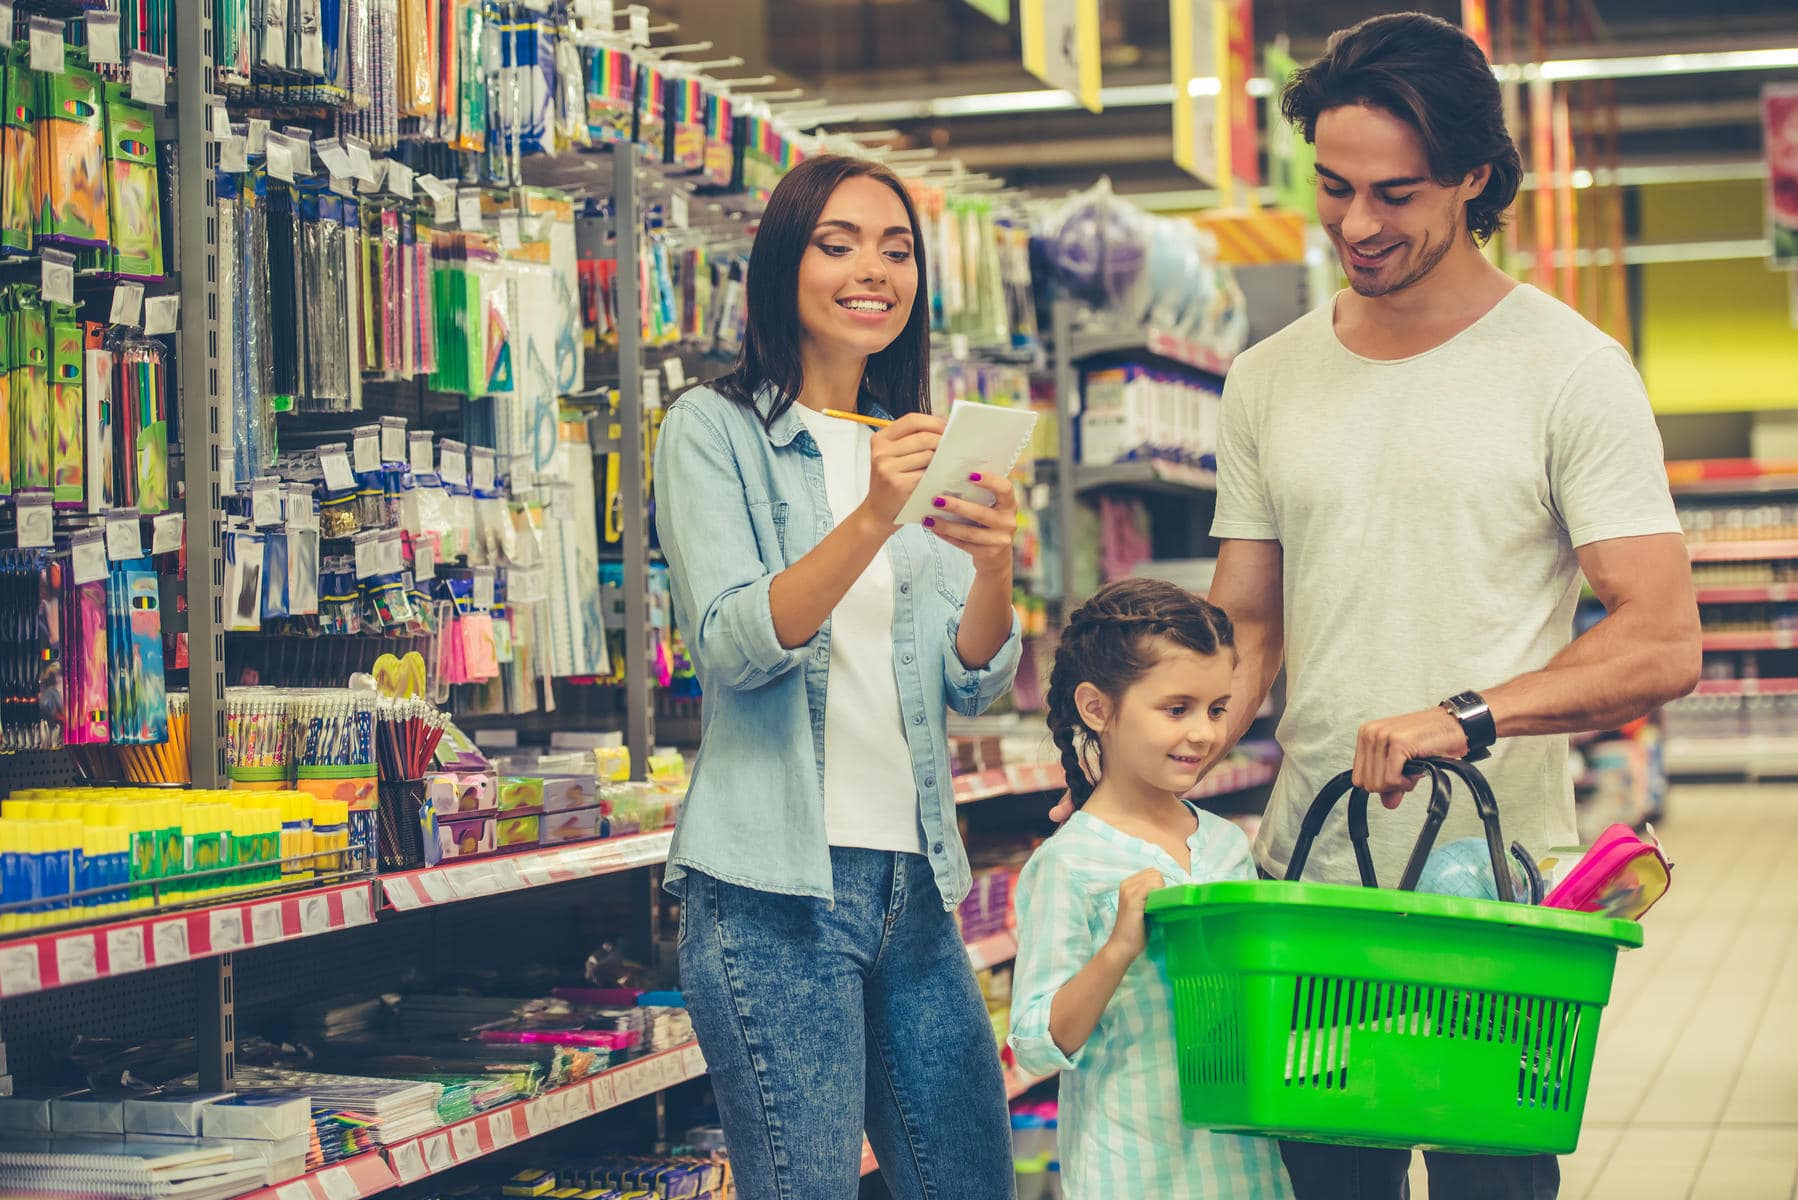 Consumer Trends for Back-to-School Shopping